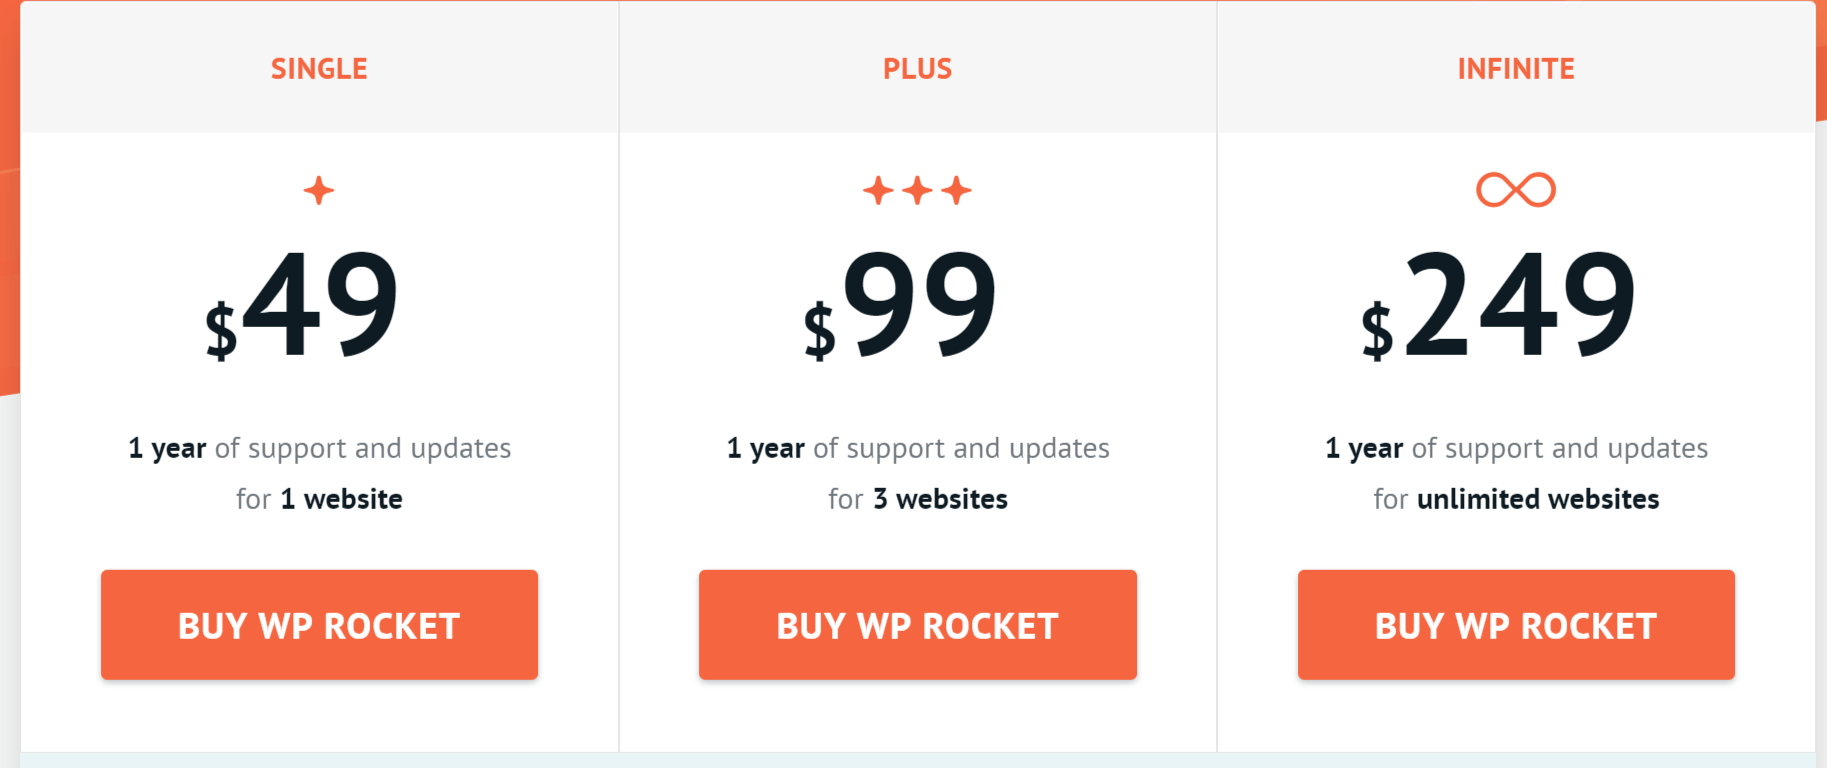 image for pricing of WP Rocket 